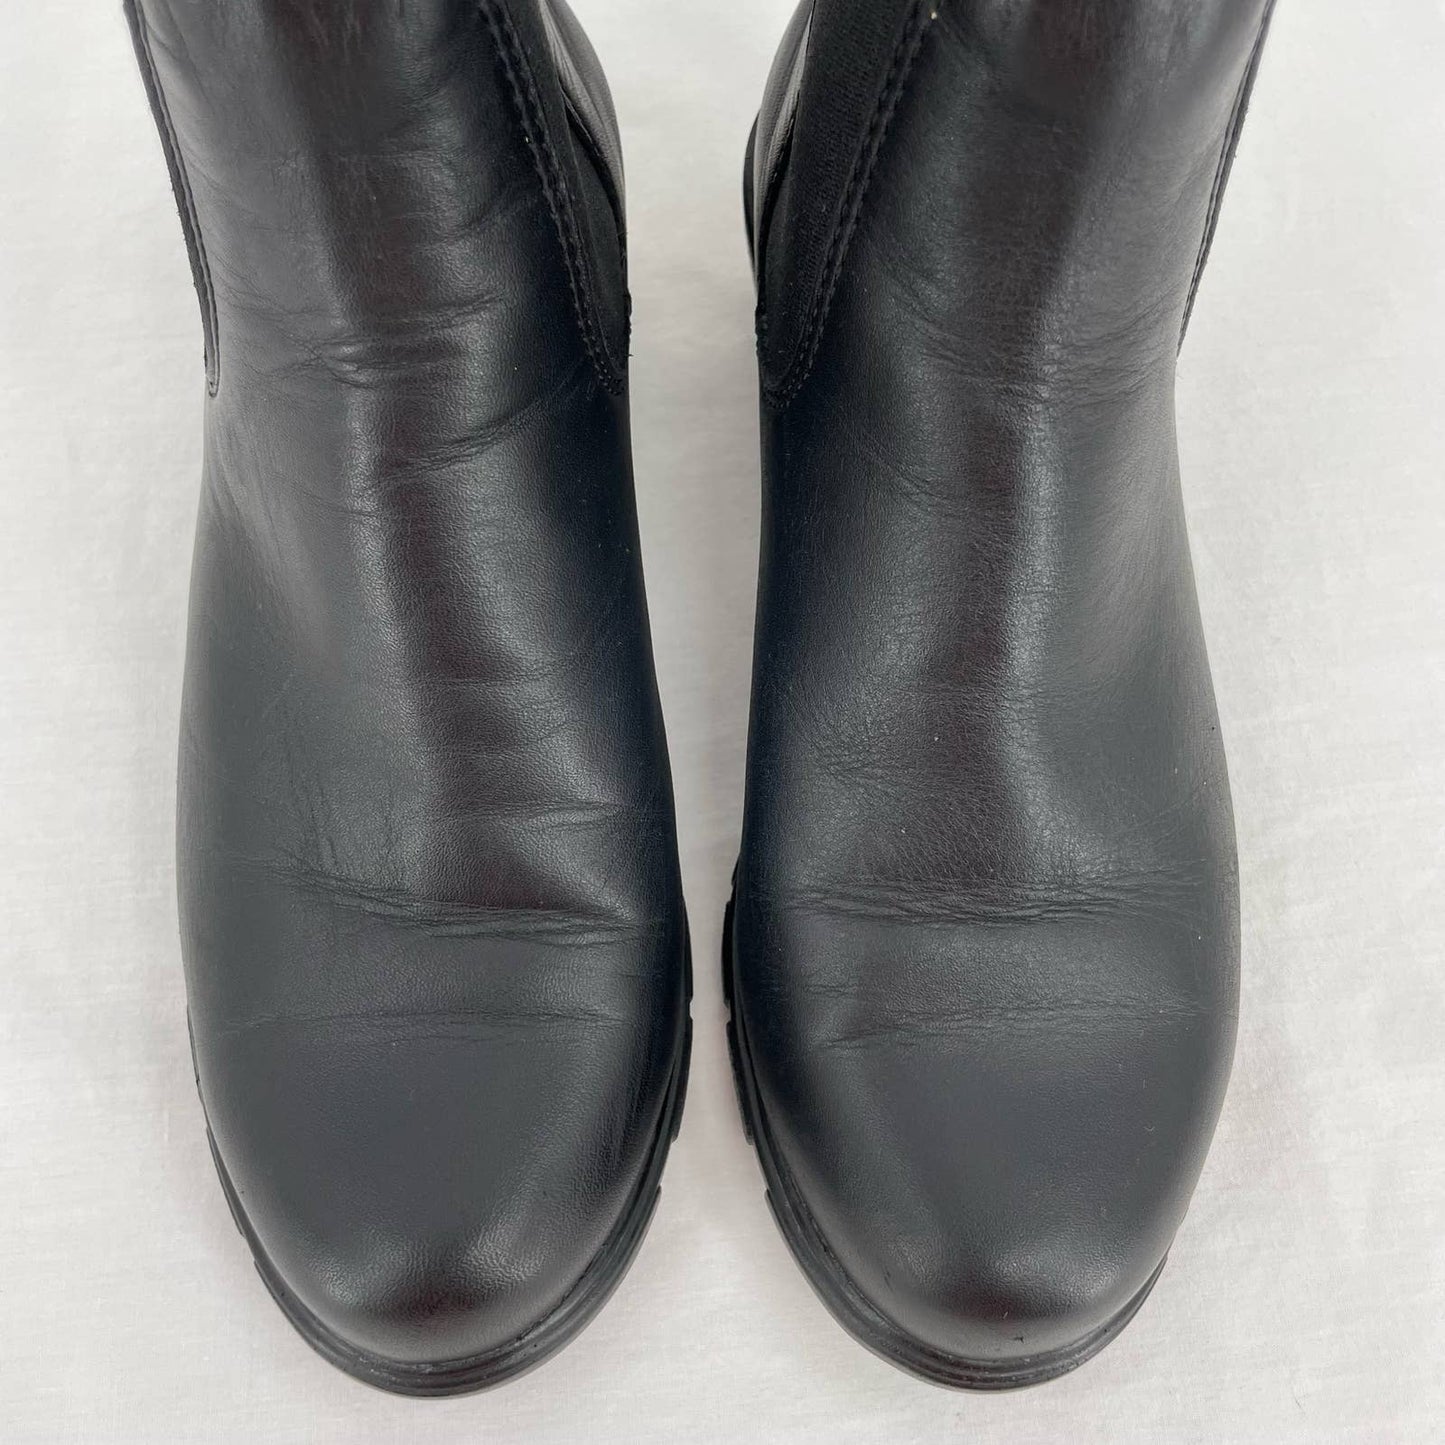 Blundstone 1671 Black Leather Heeled Boot Classic Chelsea Style Ankle Shoes Size US 7